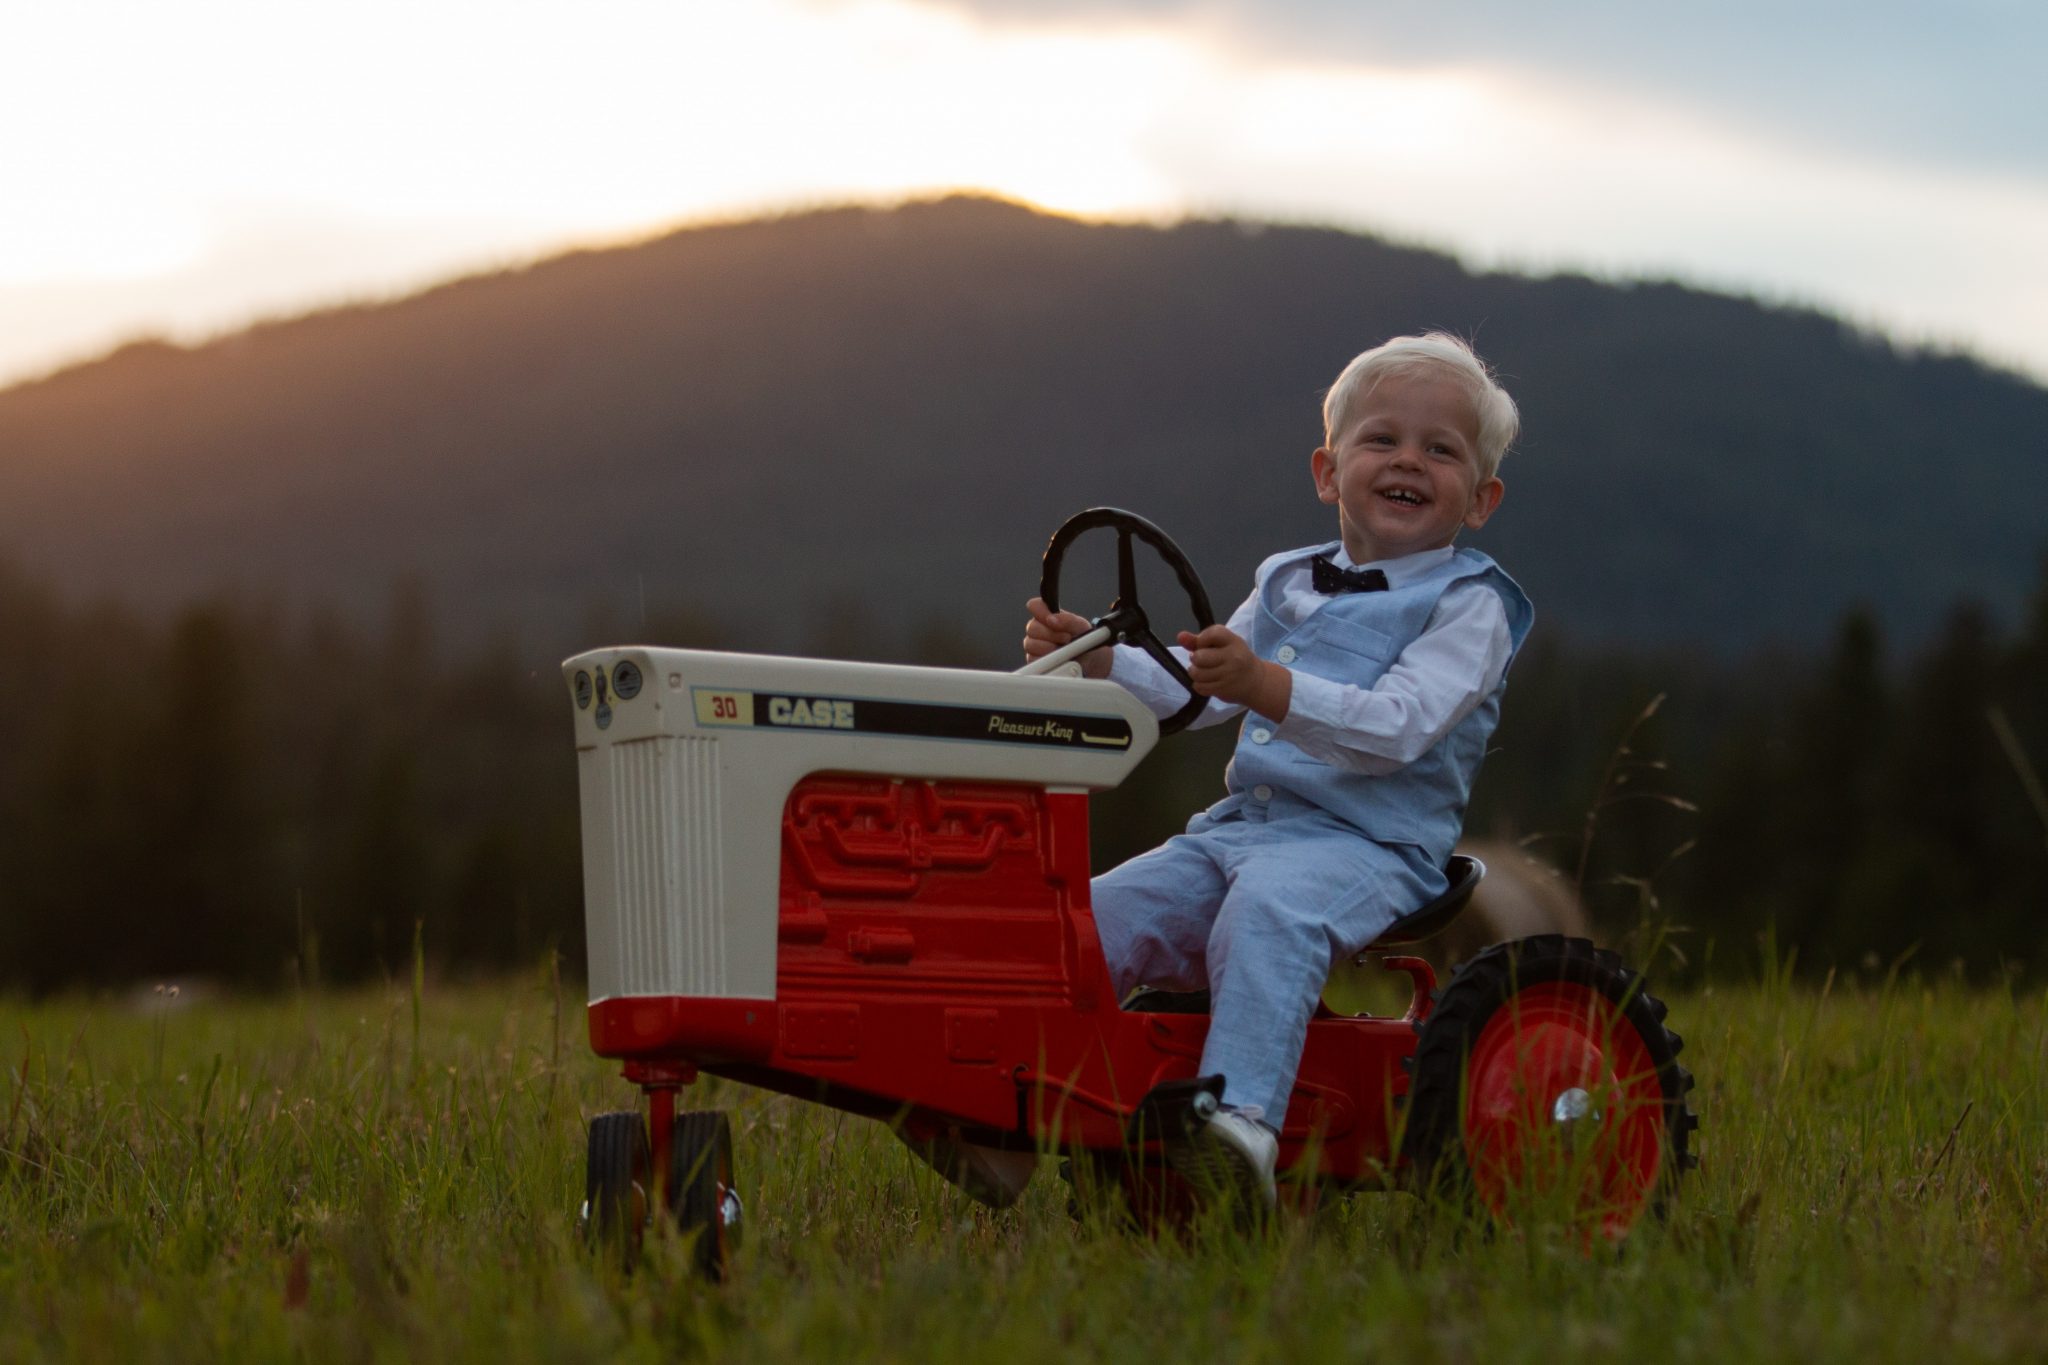 boy in blue jacket riding red and white tractor on green grass field during daytime